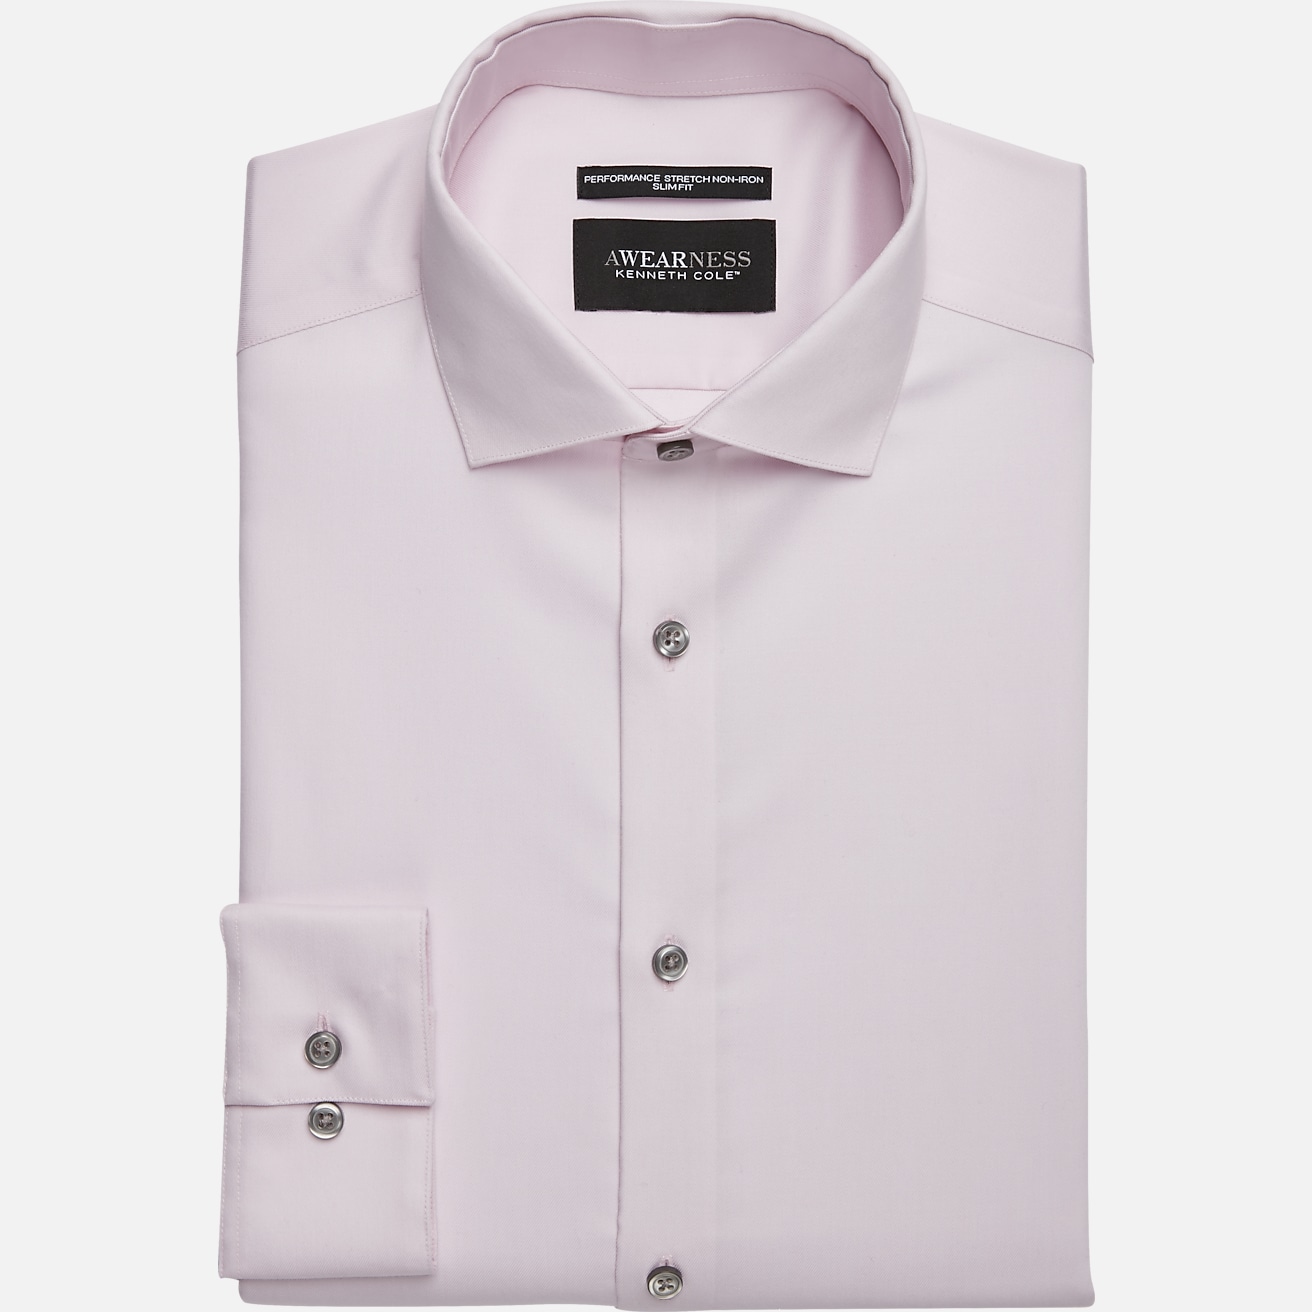 Awearness Kenneth Cole Slim Fit Performance Dress Shirt